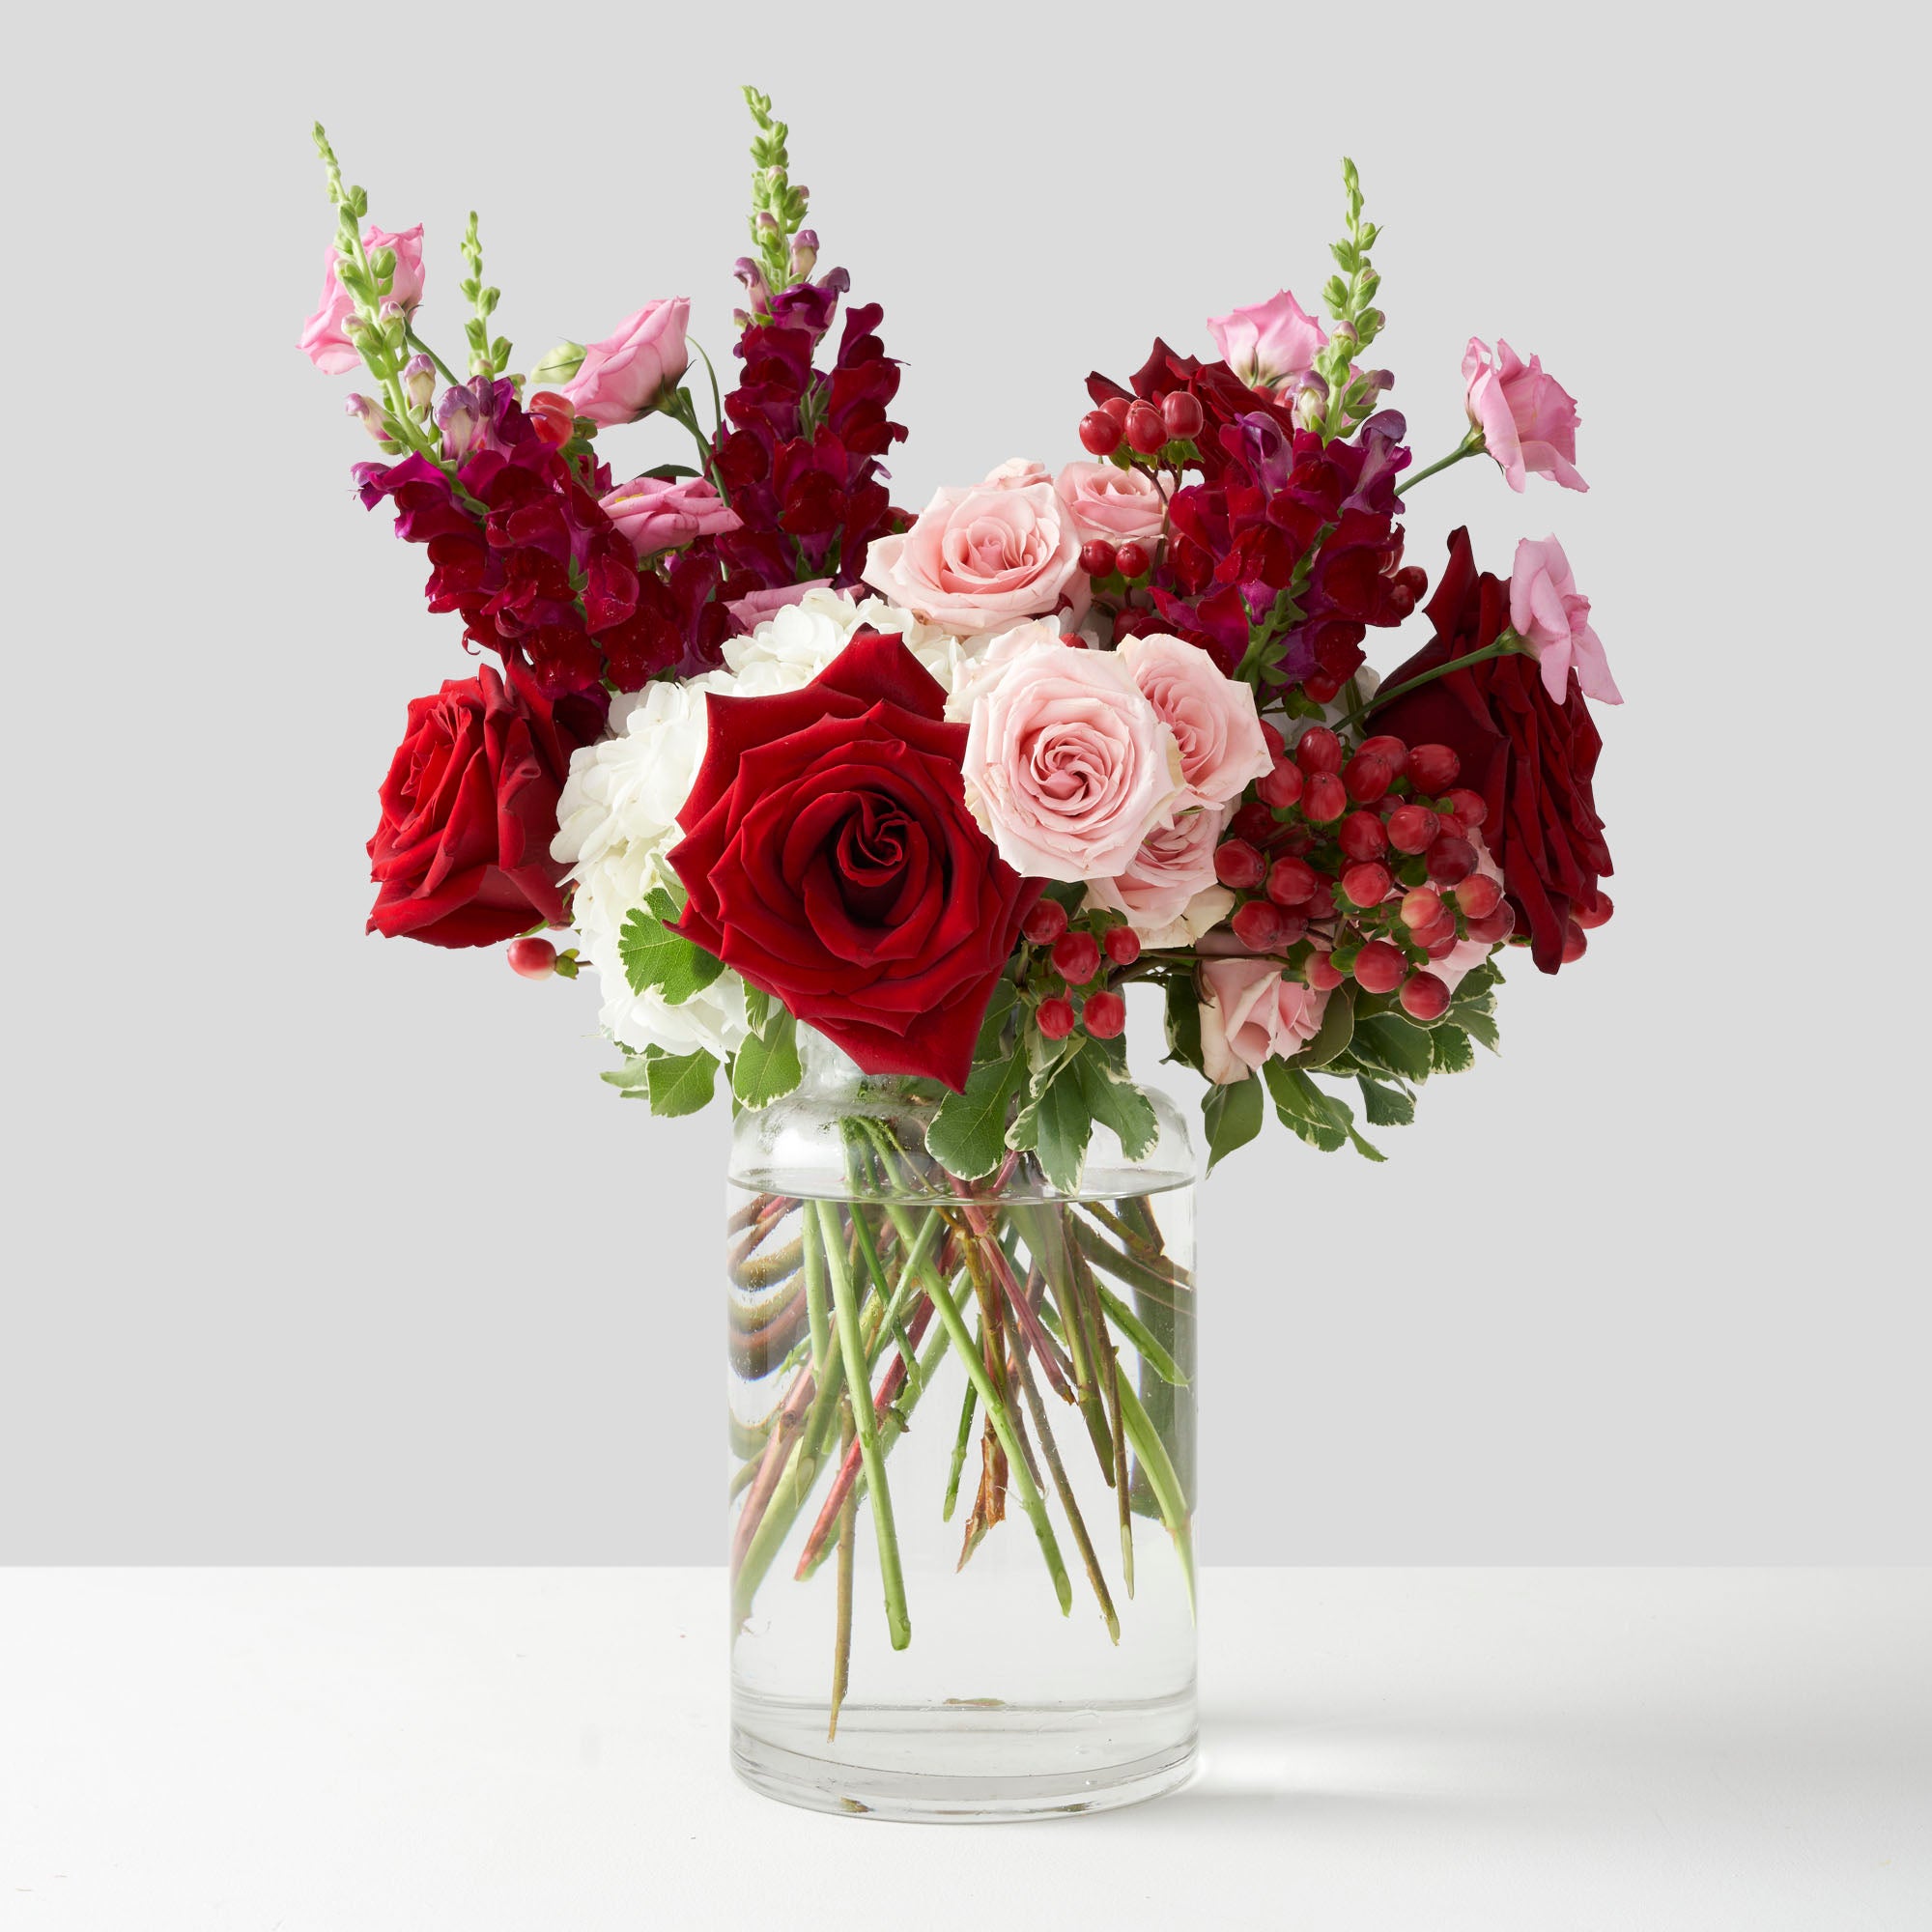 Red roses, pink roses, pink lisianthus and red snapdragons arranged in tall clear glass vase on white background.